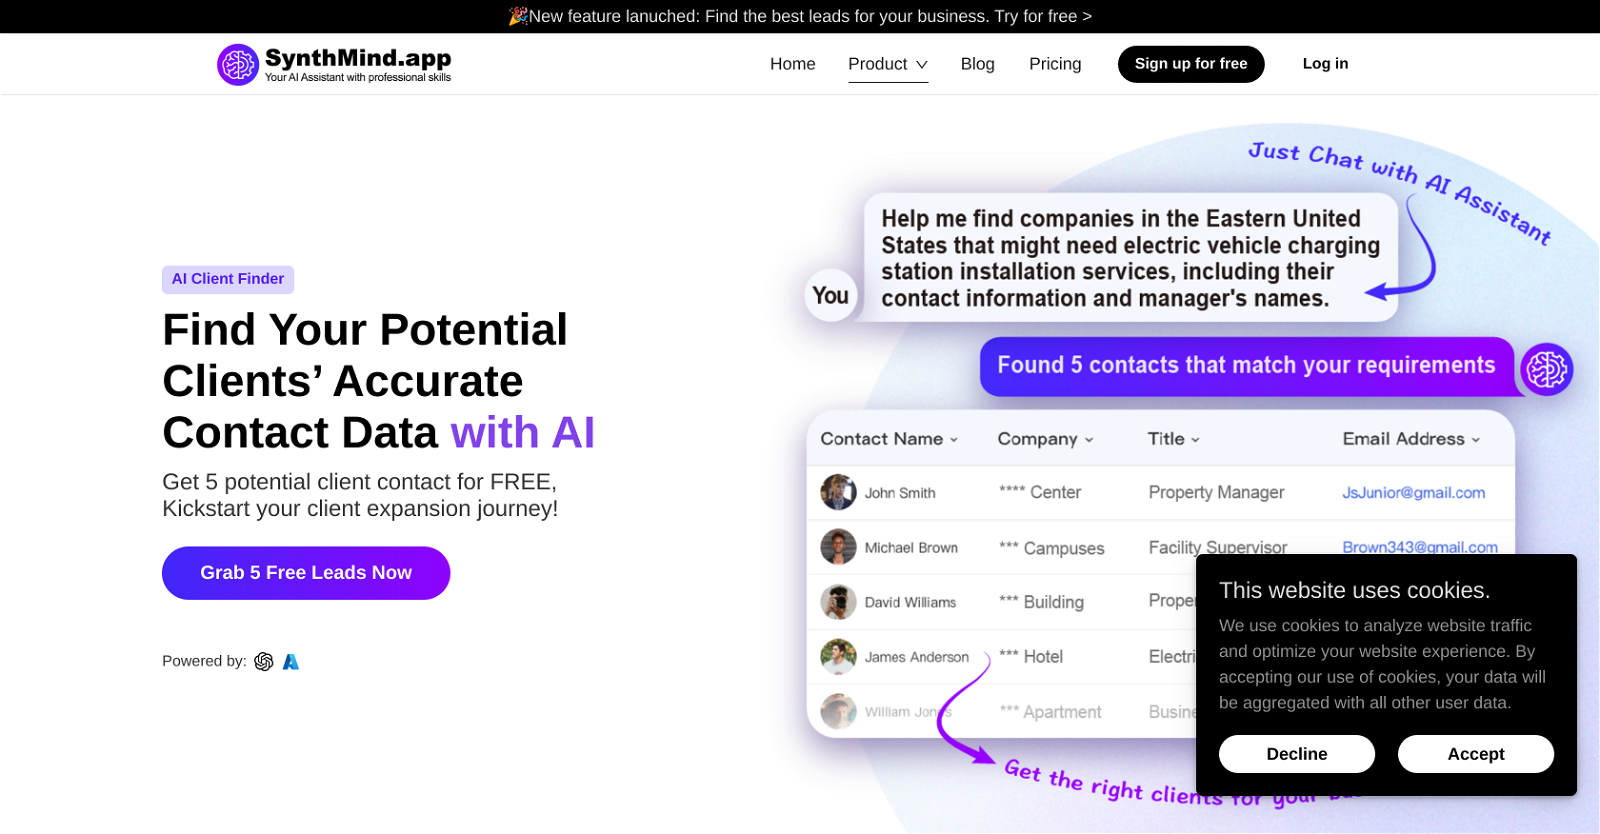 AI Client Finder by SynthMind website